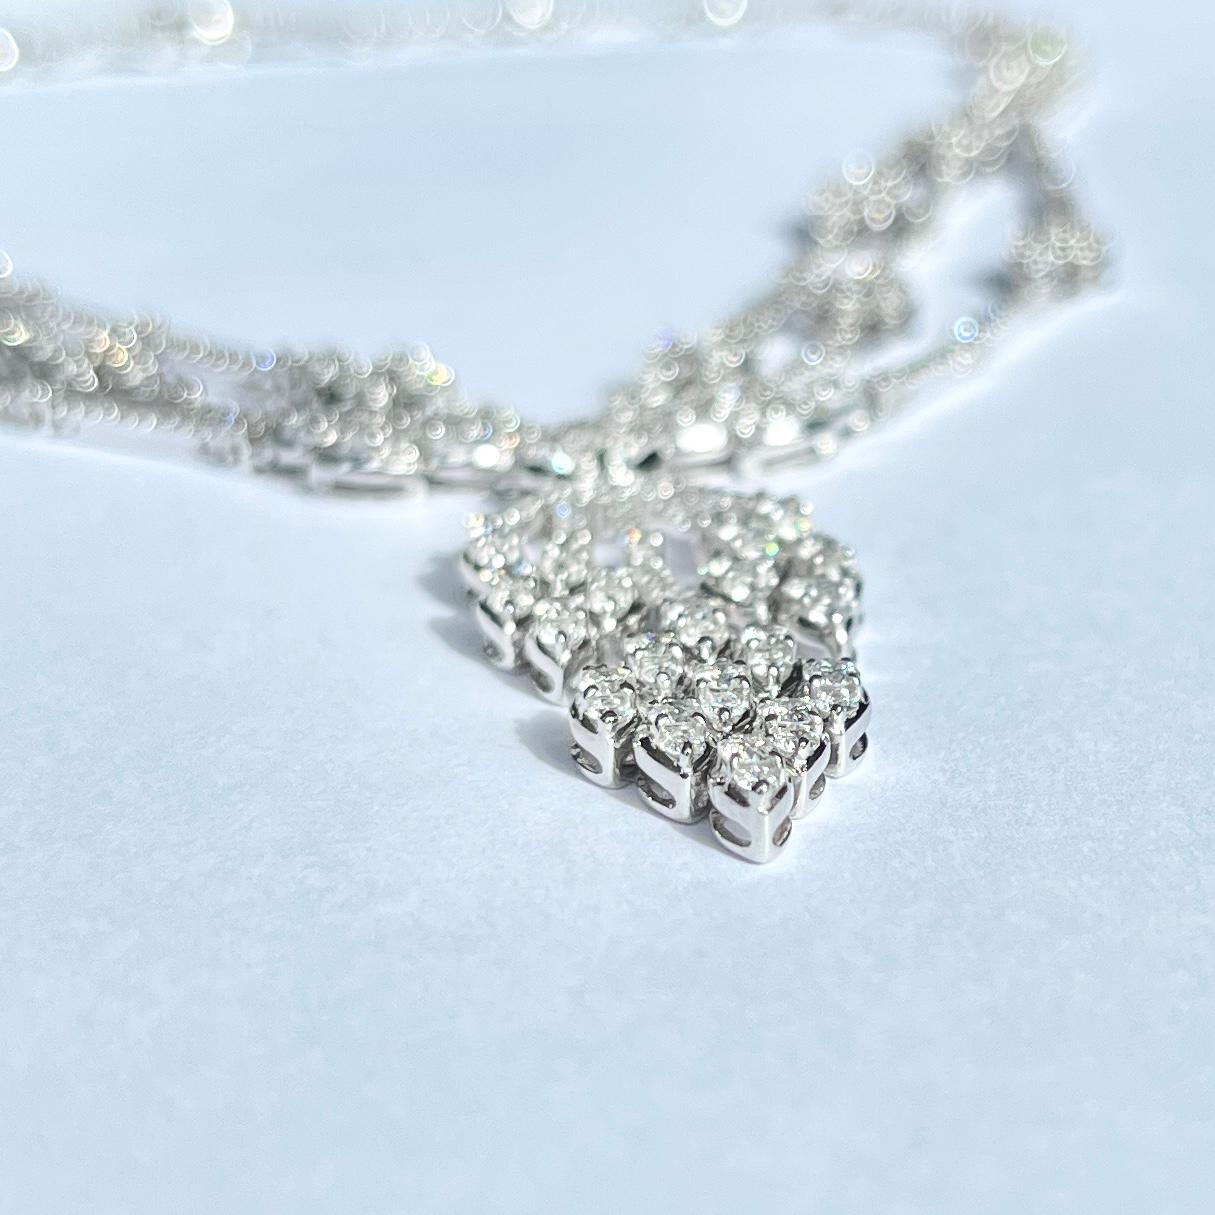 The bright white diamonds are natural, clean stones. They total approx 10carats and this stylish necklace is modelled in 18 carat white gold. The necklace is completely encrusted with these beautiful stones and has wonderful sparkle under any light.